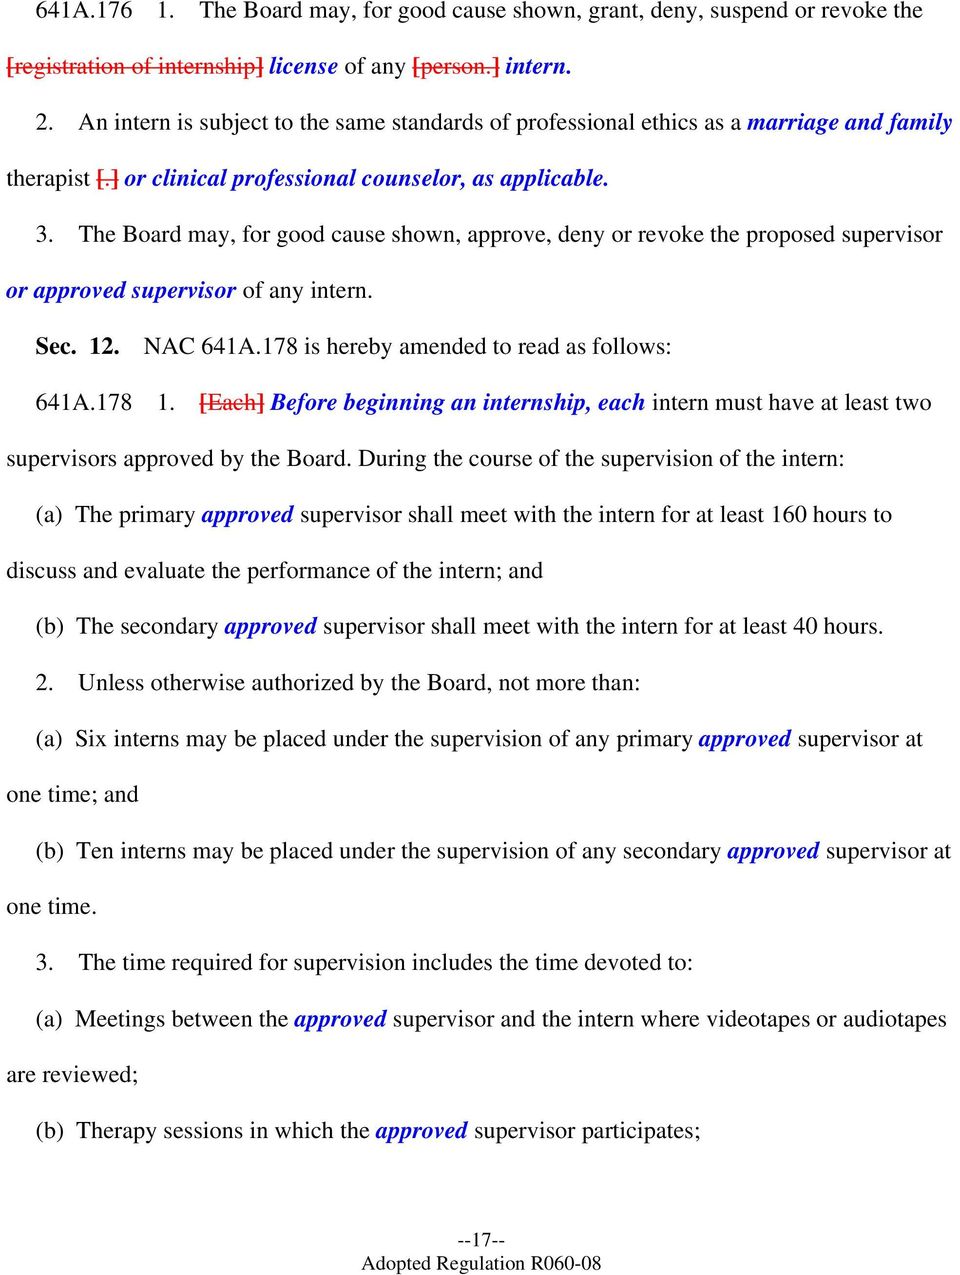 The Board may, for good cause shown, approve, deny or revoke the proposed supervisor or approved supervisor of any intern. Sec. 12. NAC 641A.178 is hereby amended to read as follows: 641A.178 1.